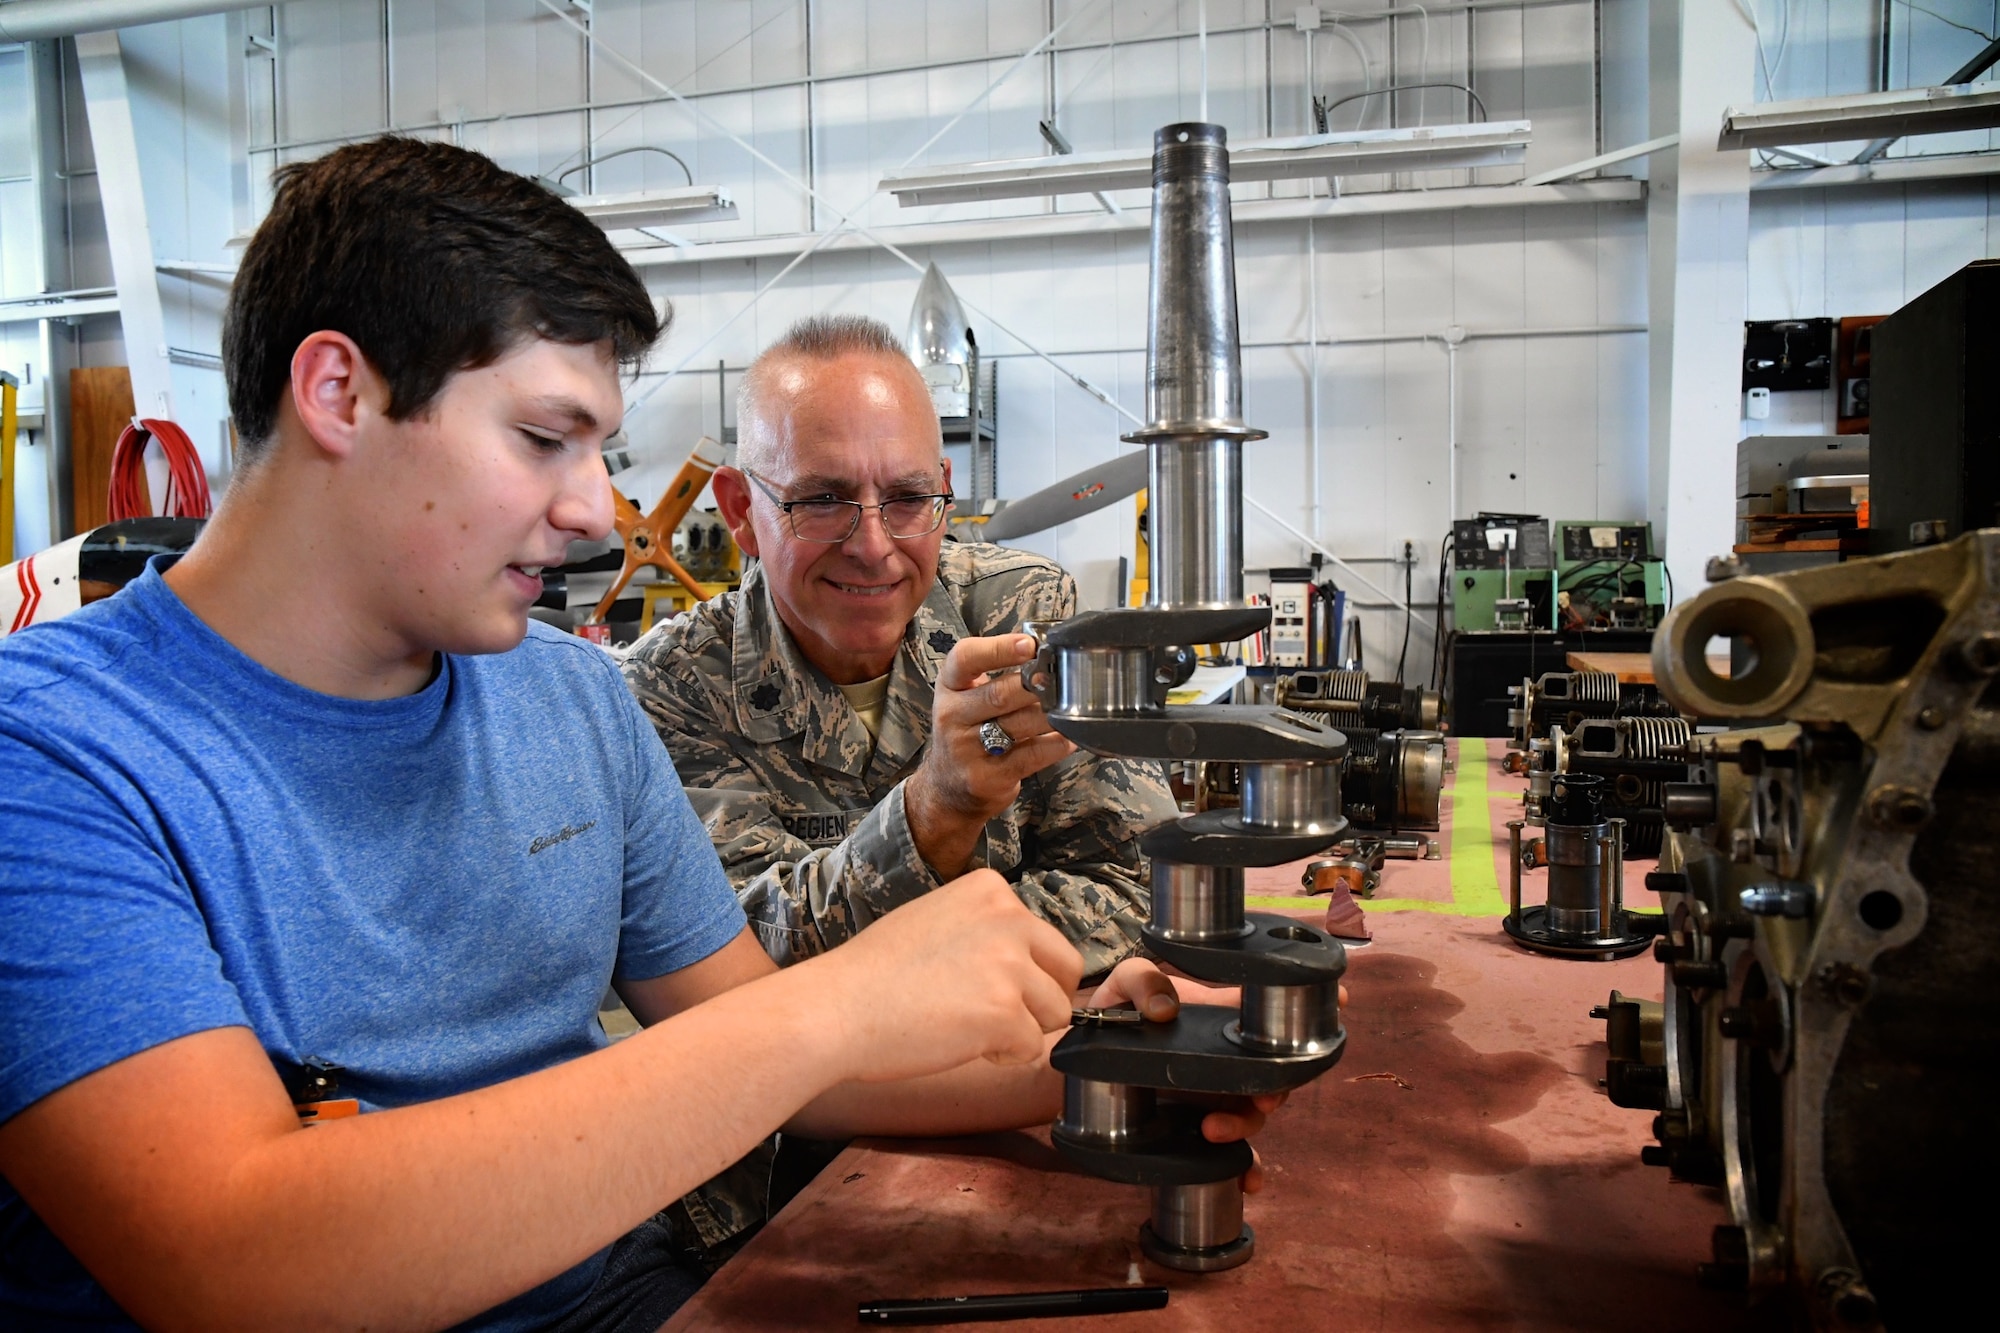 Lt Col. Stan Paregien, 932nd Airlift Wing public affairs officer, speaks with Lincoln Land College Aviation program students and staff Sept. 30, 2019, as part of a community outreach to share news and opportunities to serve in the Air Force Reserve within Illinois.  Charles Oakes shows the colonel how to use a connecting rod on the crankshaft of a Continental A65 Reciprocating engine inside the instructive facility.  (Photo by David Pietrzak, Aviation Program Instructor)